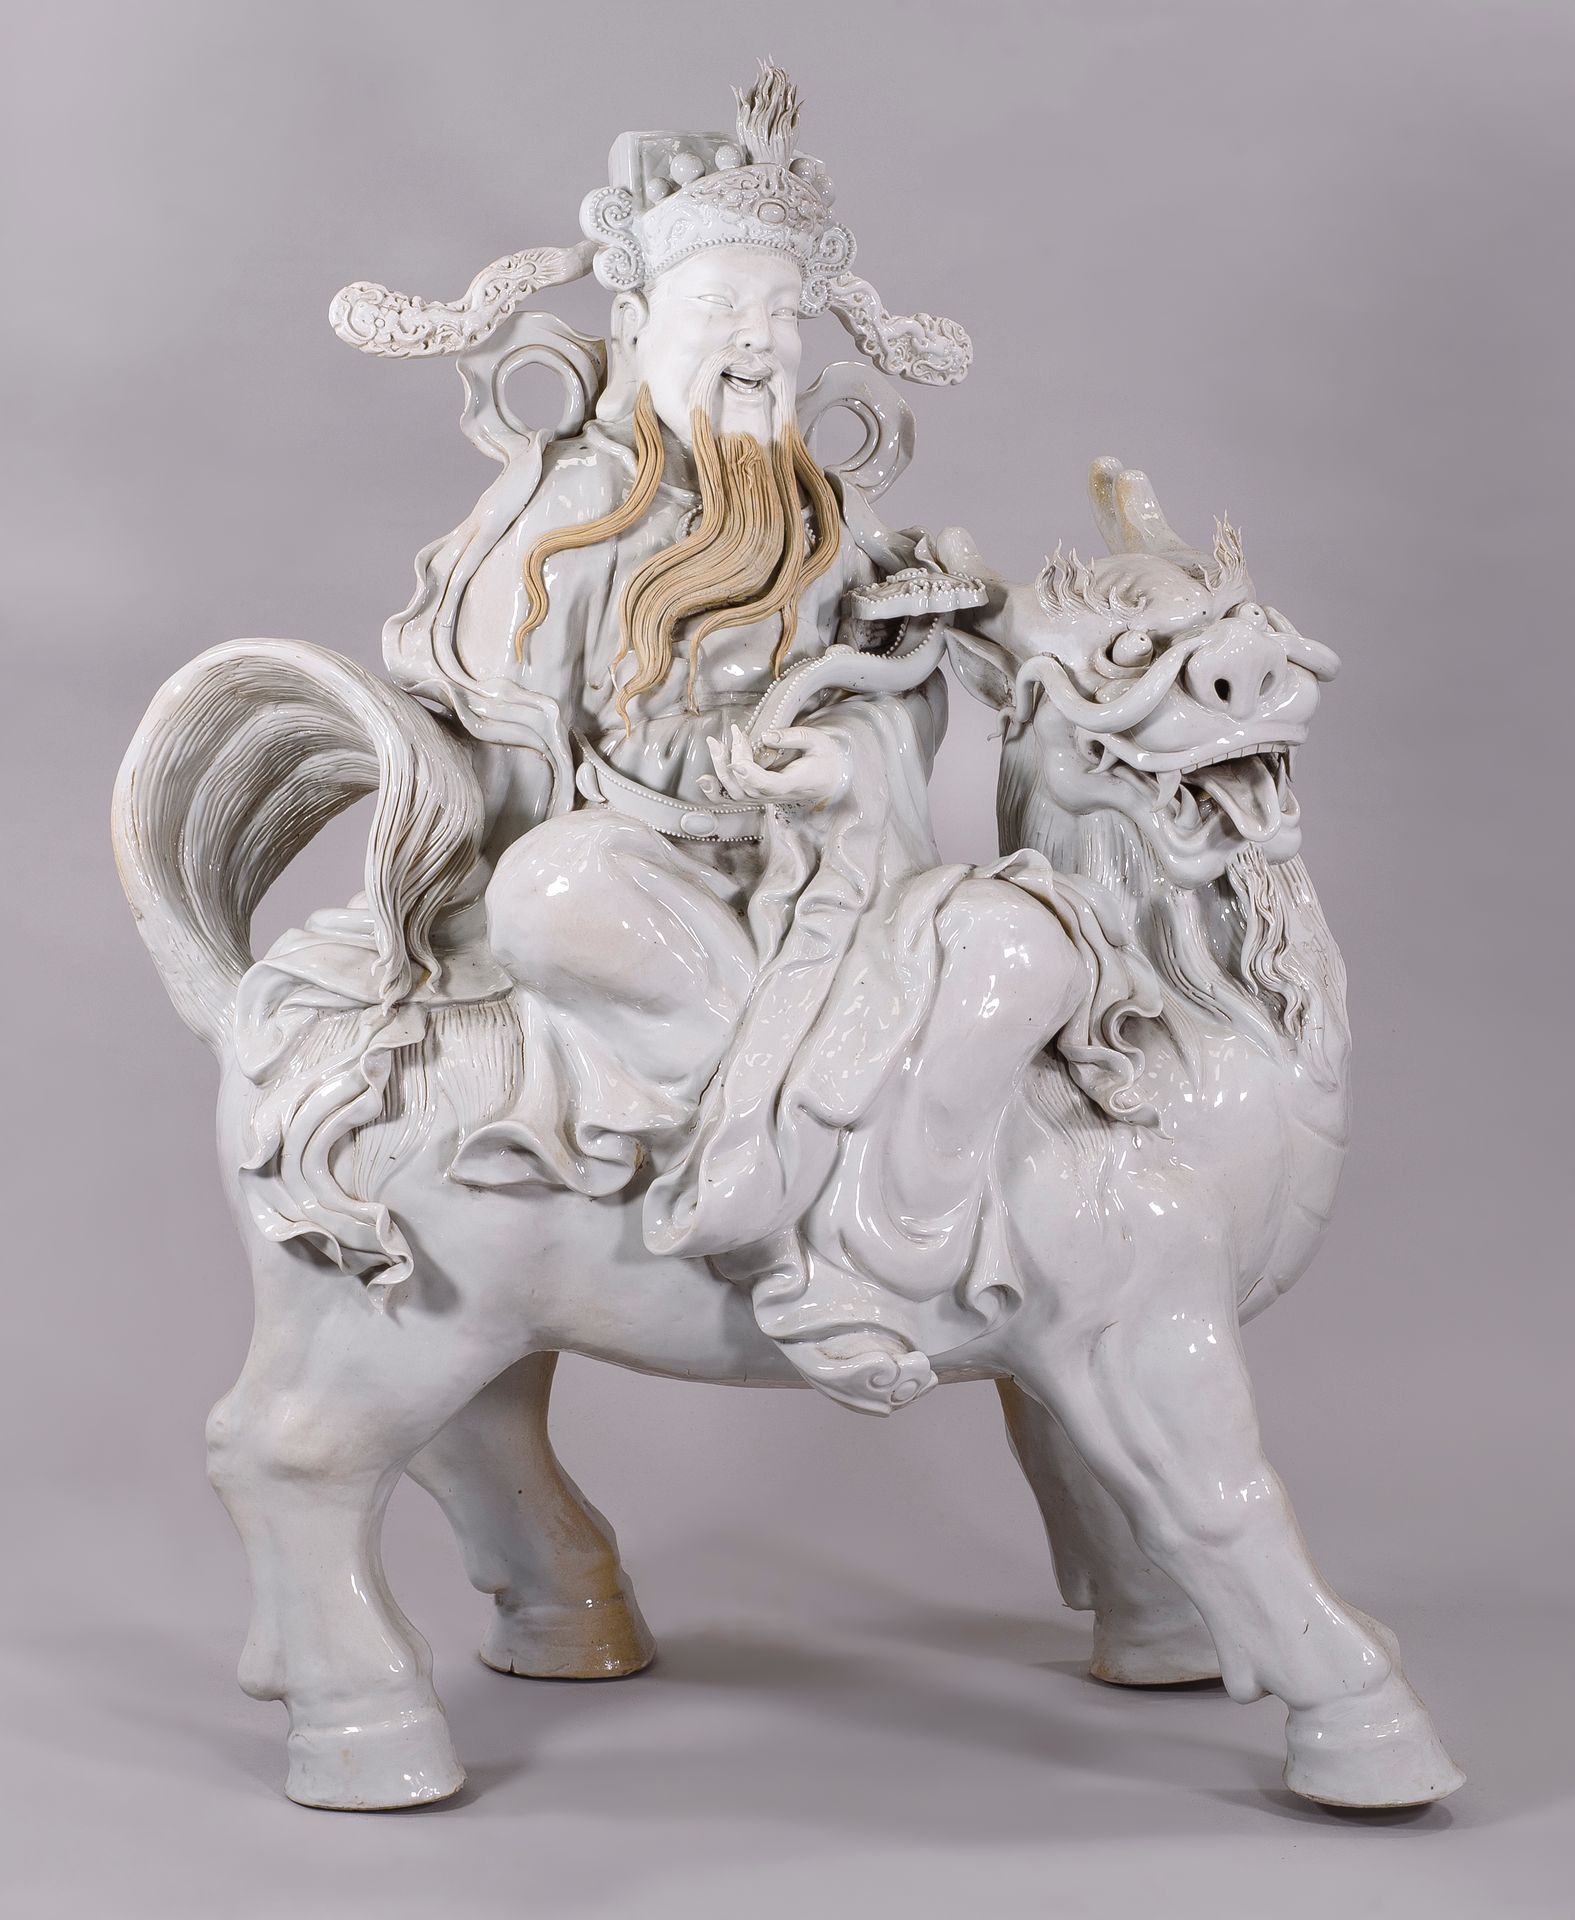 Null China, Qing period

Large white porcelain group from China

It represents a&hellip;